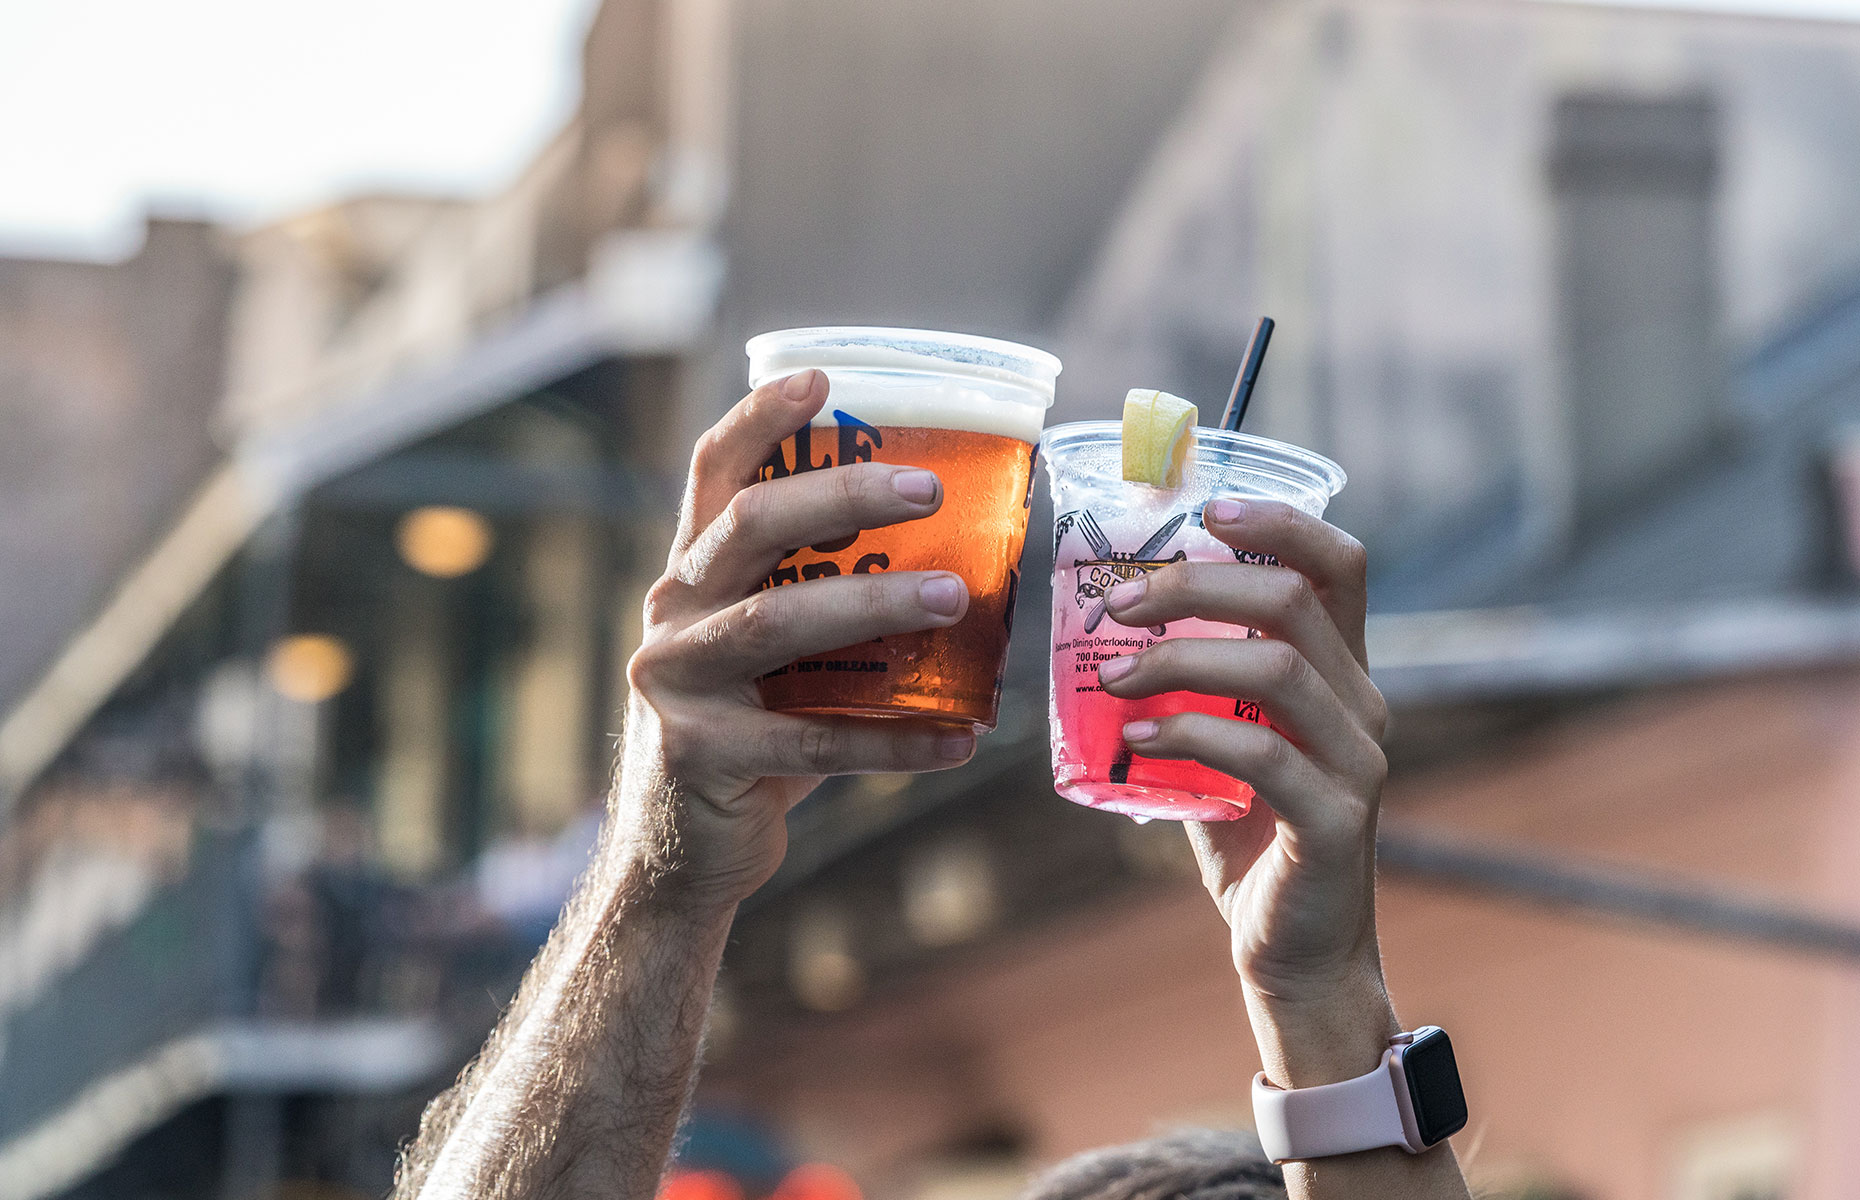 Top 6 US Cities Where You Can Drink in Public